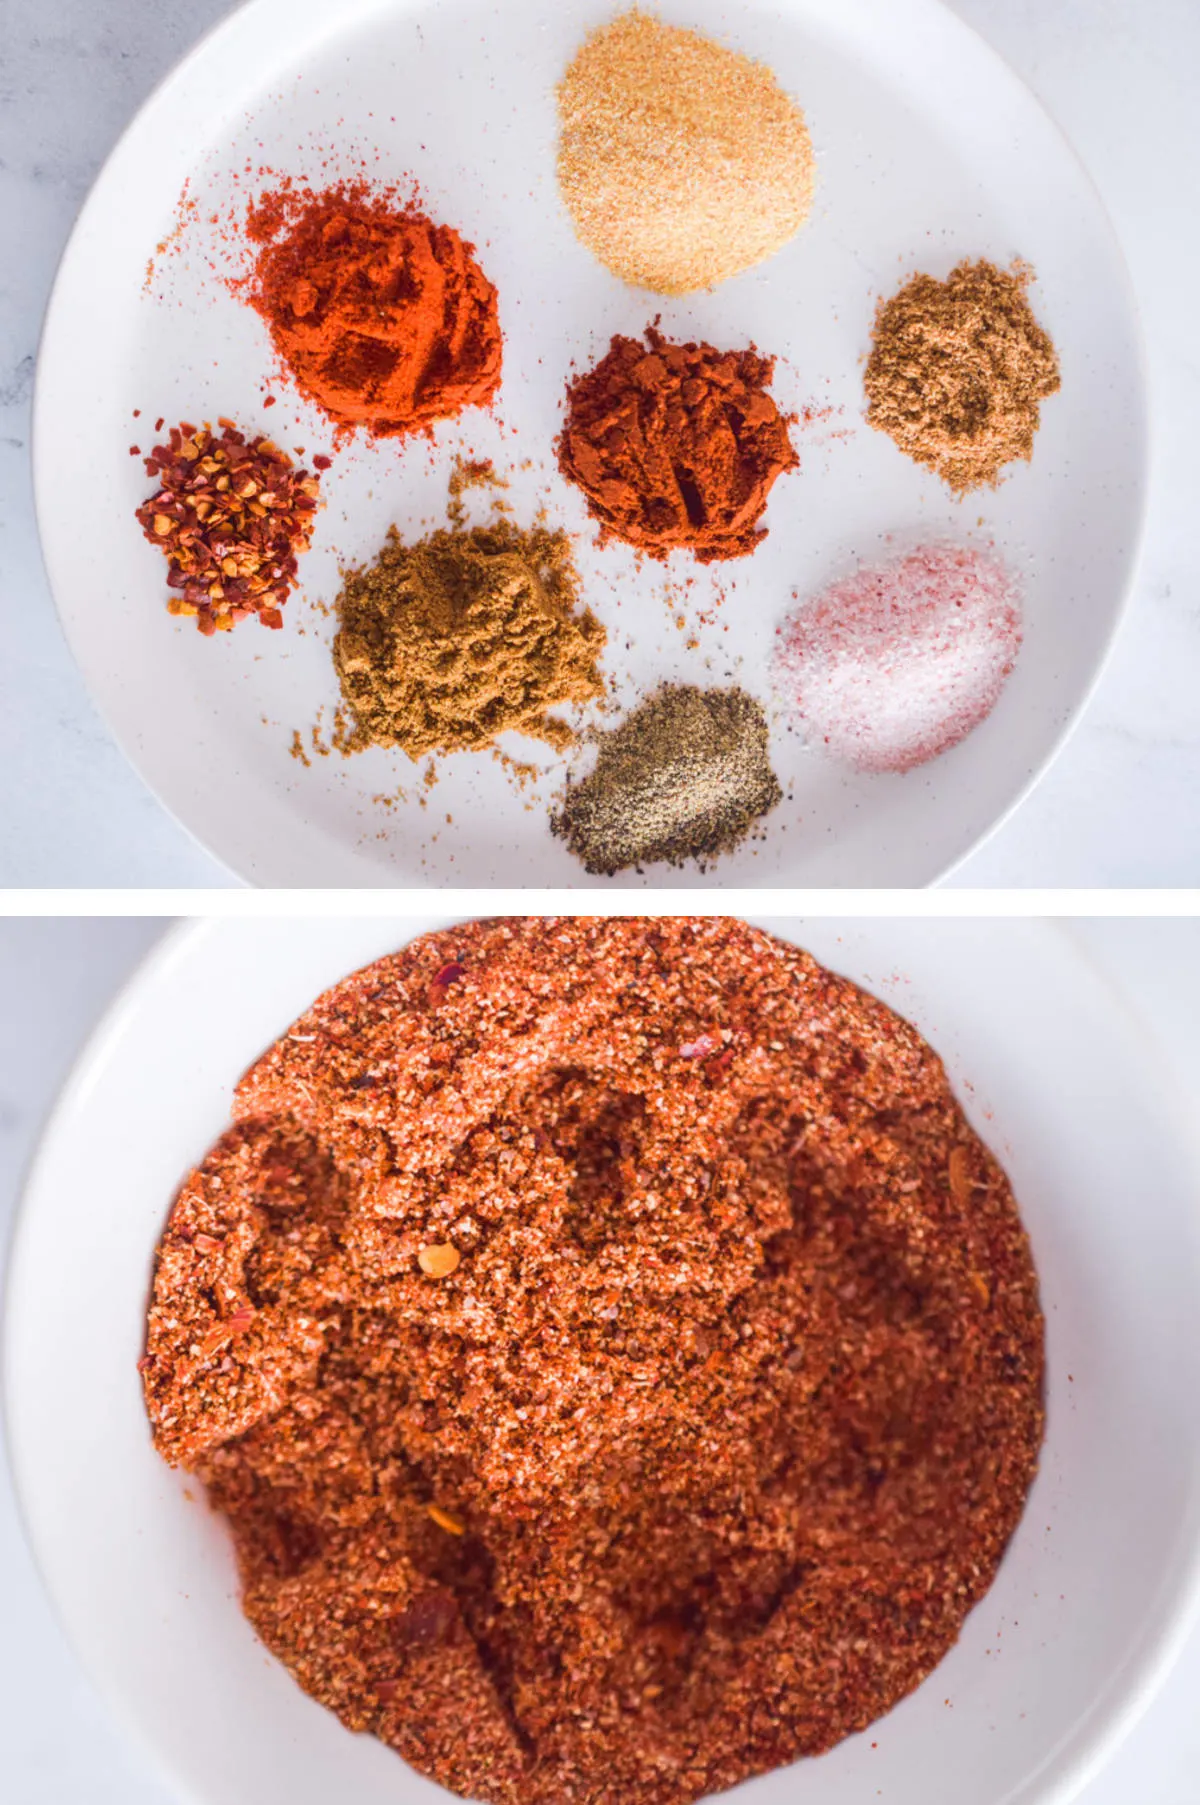 Two overhead images in one: 1. All the spices on a white plate in individual piles. 2. All the spices in a bowl mixed together. 